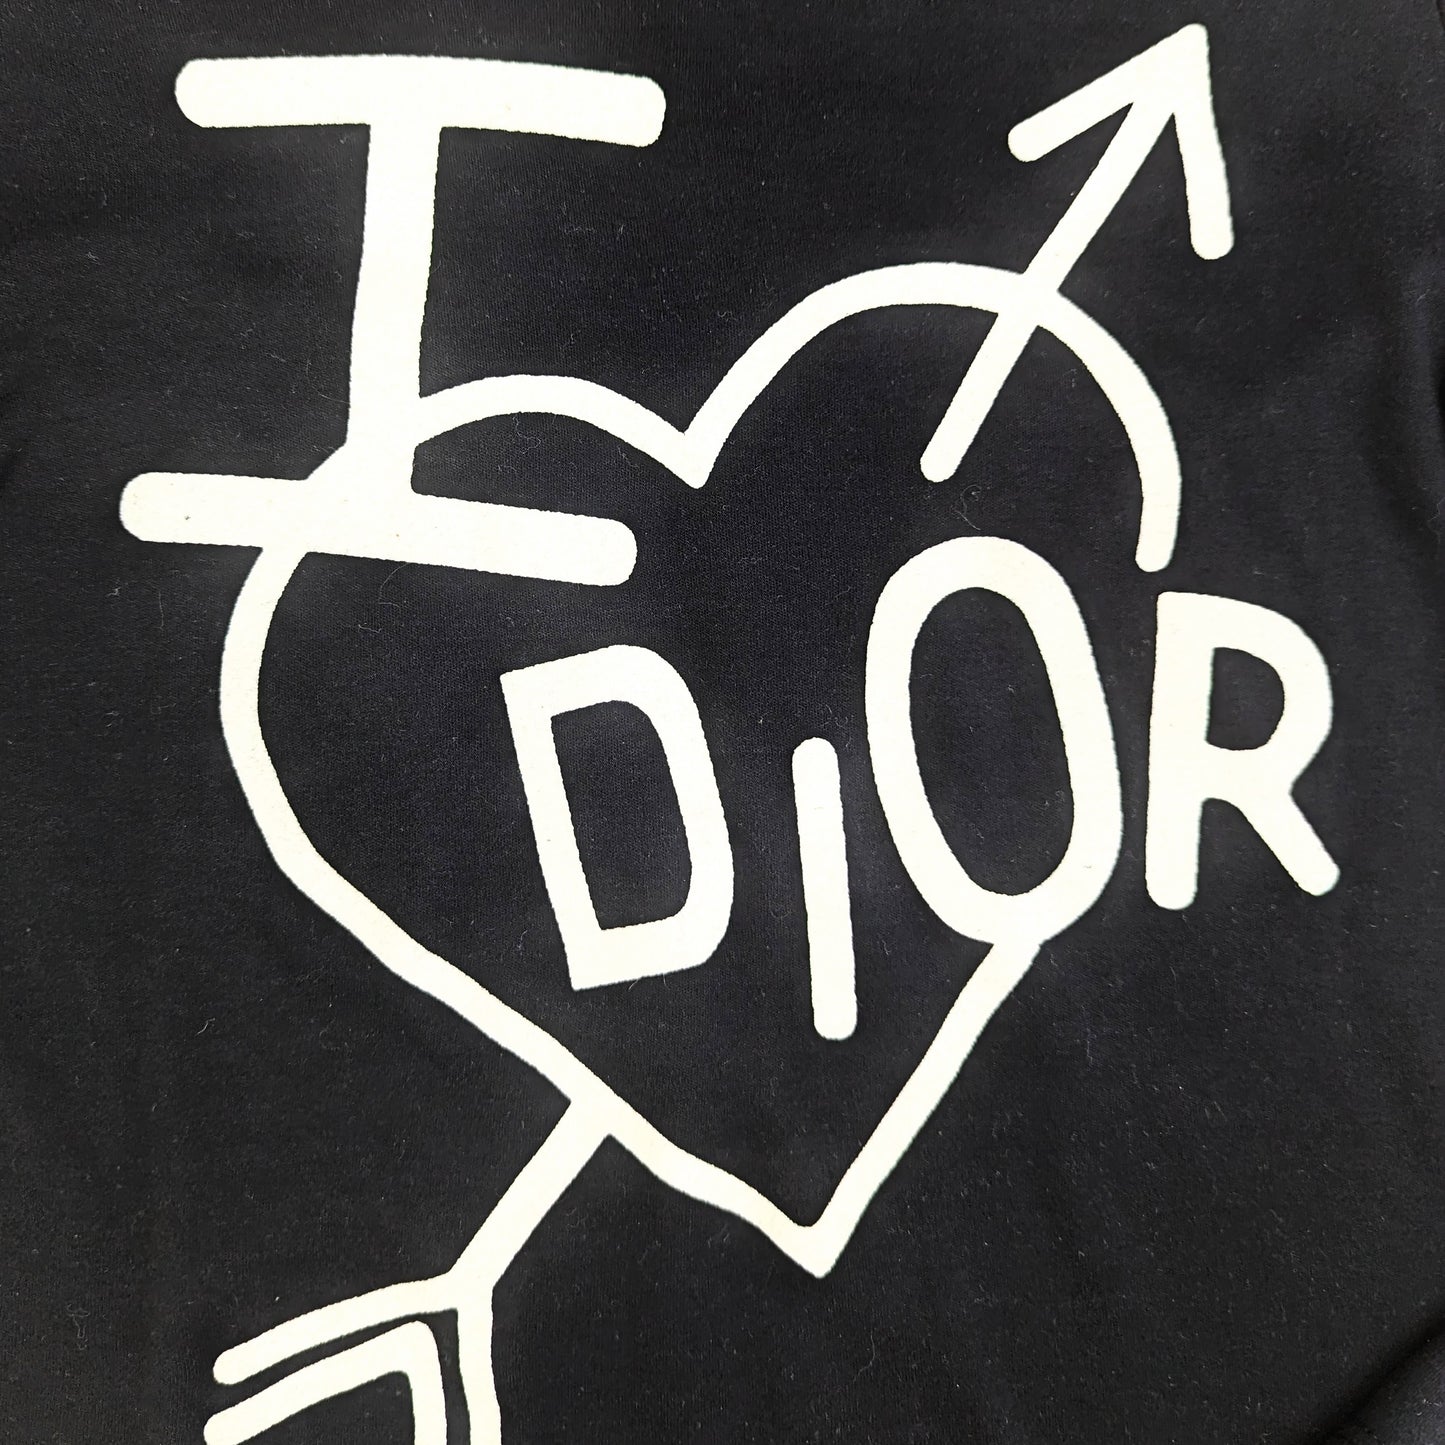 Dior "I Love Dior" long sleeve t-shirt by Galliano - S/S2003 - L